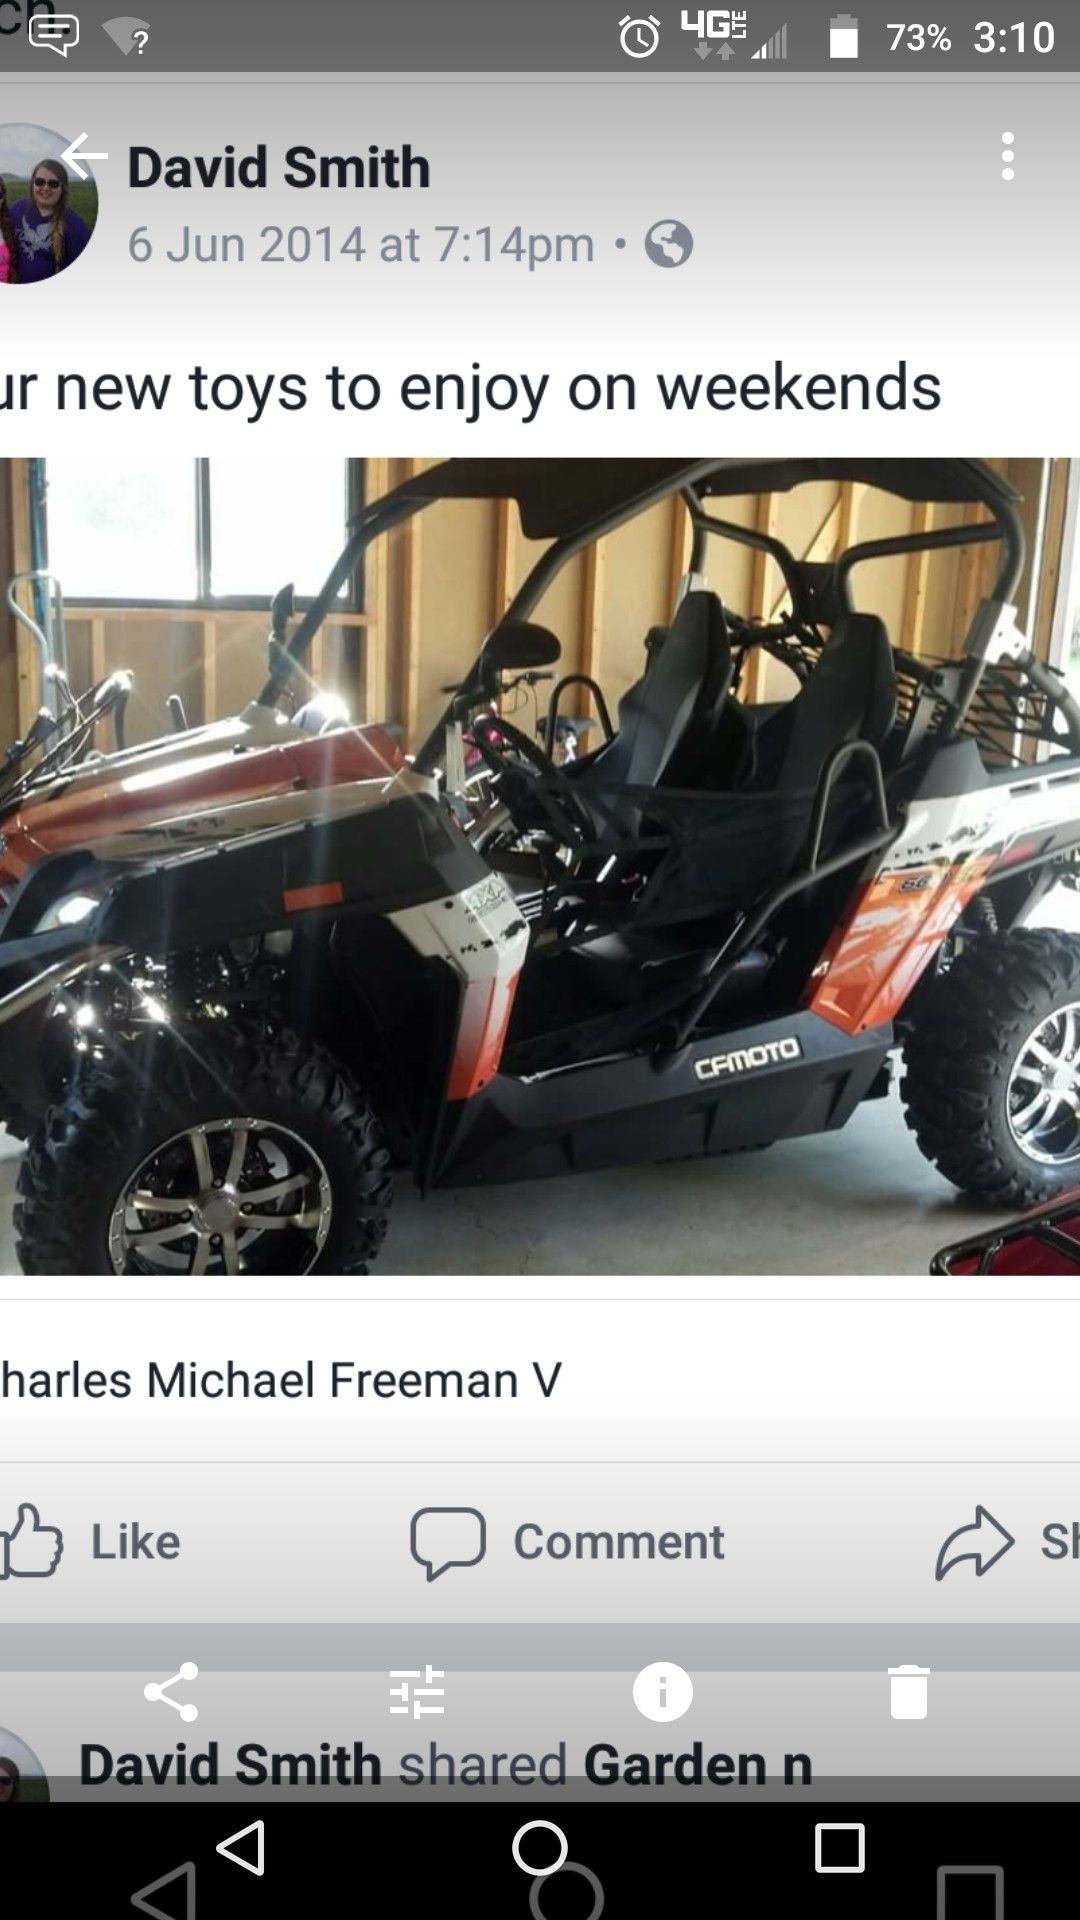 Photo 1 2015 side by side CFmoto. 1800 miles. 2 2015 500 four wheeler by CFmoto with 850 miles. 3 2015 16 foot wedge nose enclosed trailer.